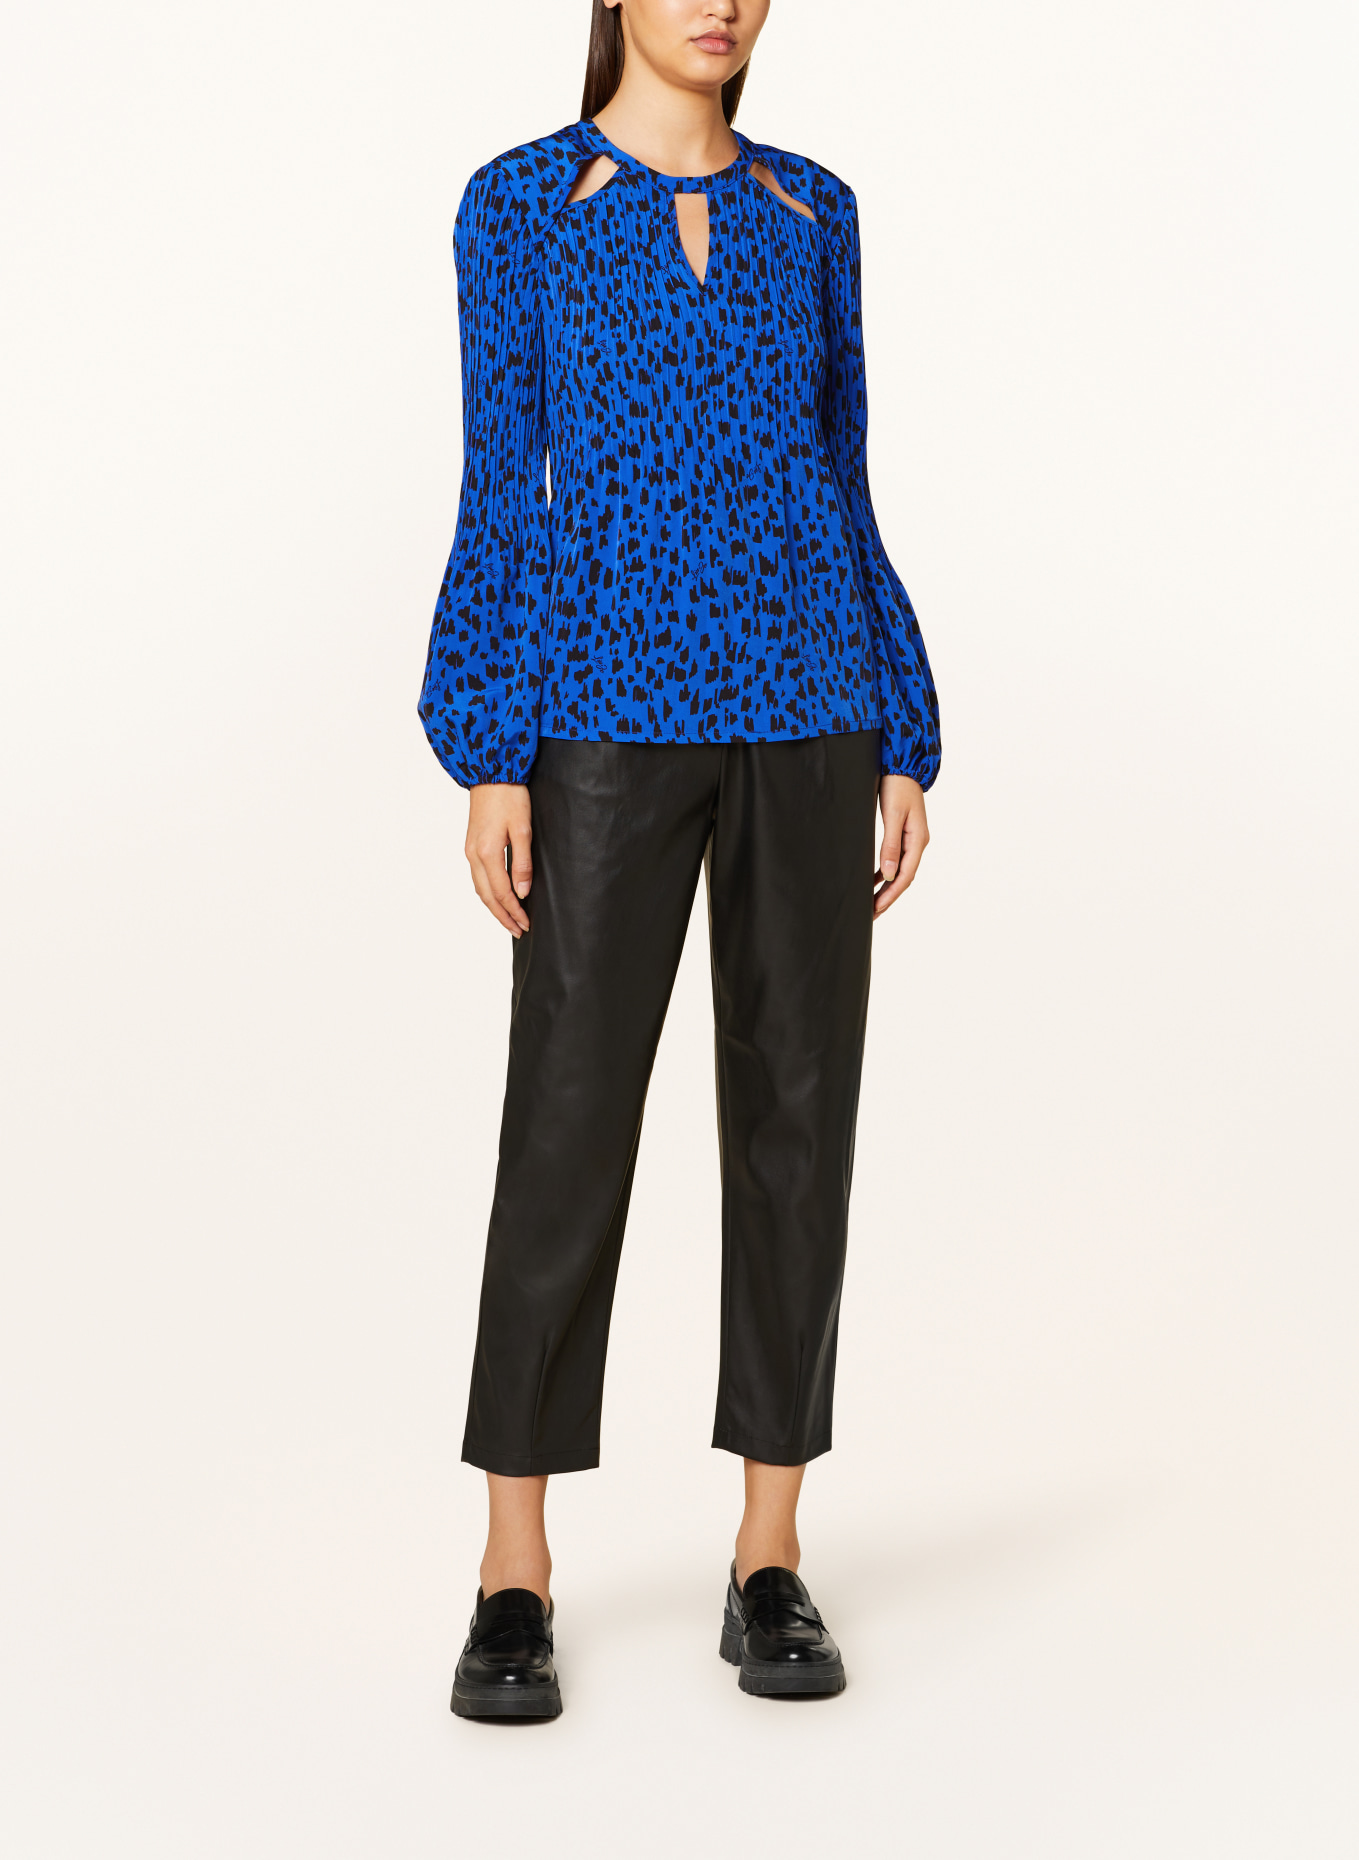 LIU JO Shirt blouse with cut-out and pleats, Color: BLUE/ BLACK (Image 2)